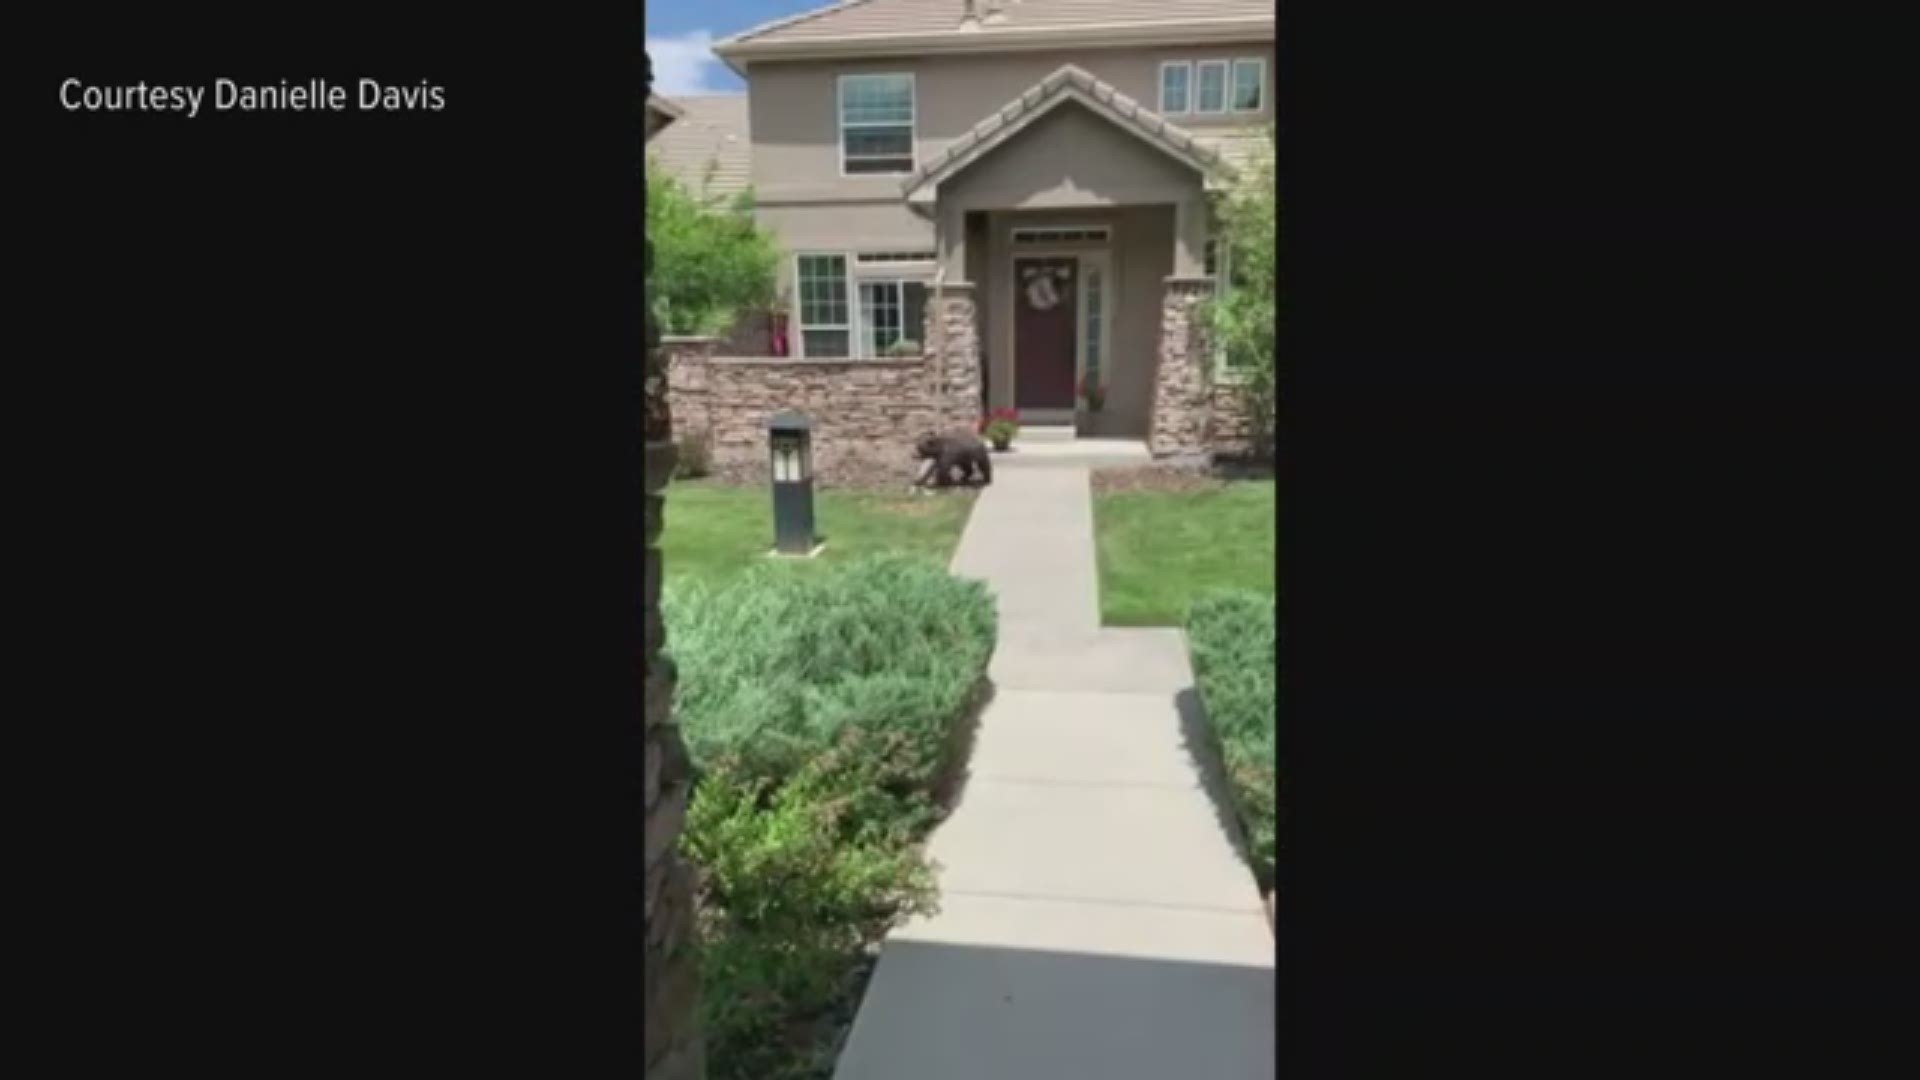 A bear was spotted wandering through the suburban community of Highlands Ranch the afternoon of 7/17/20.